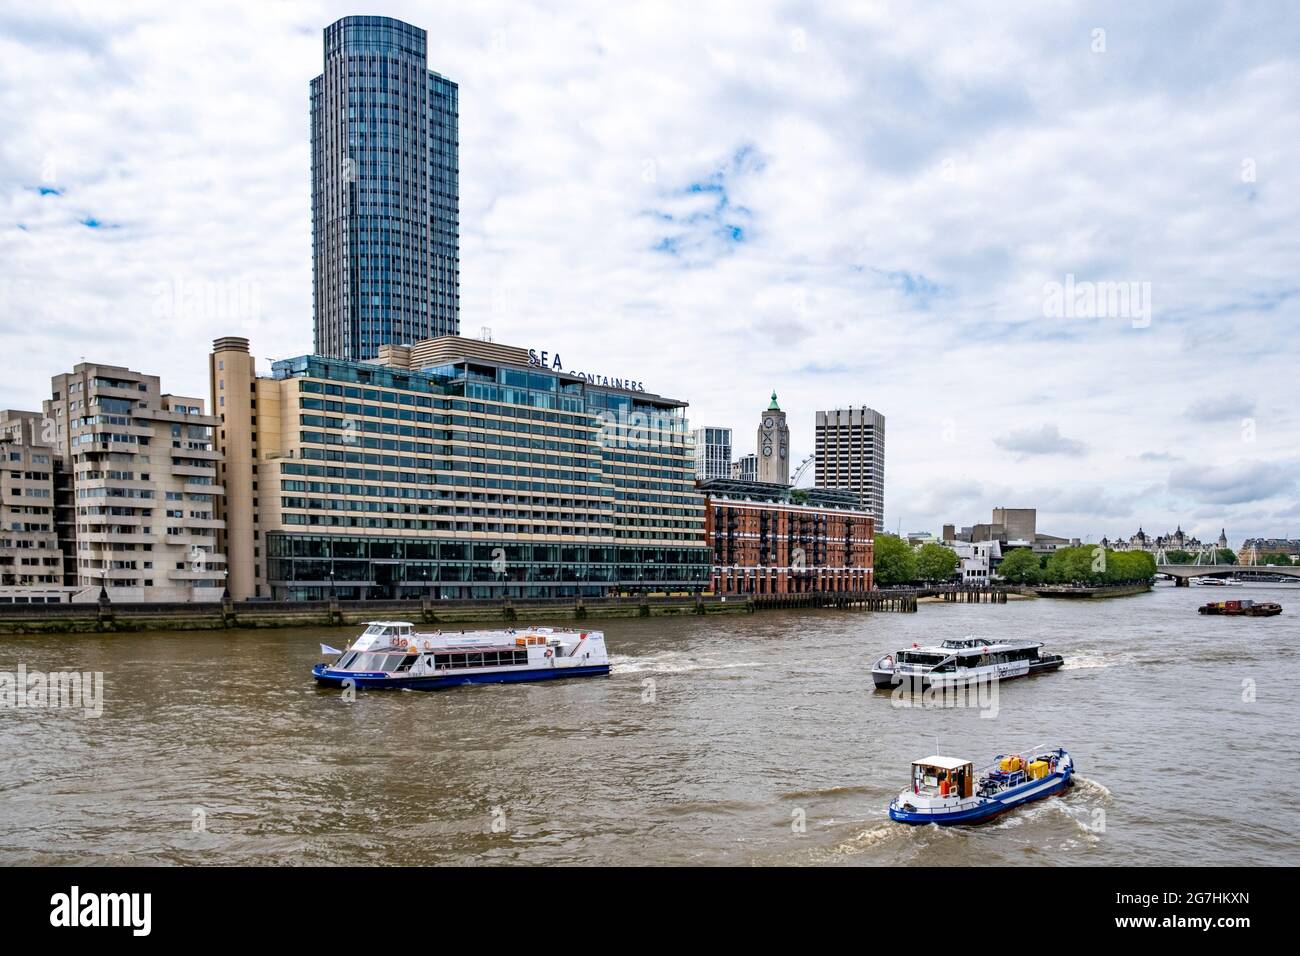 London South Bank skyline with Sea Containers, South Bank Tower, Oxo Tower Wharf and LWT Tower, with busy pleasure boat traffic on the Thames below. Stock Photo